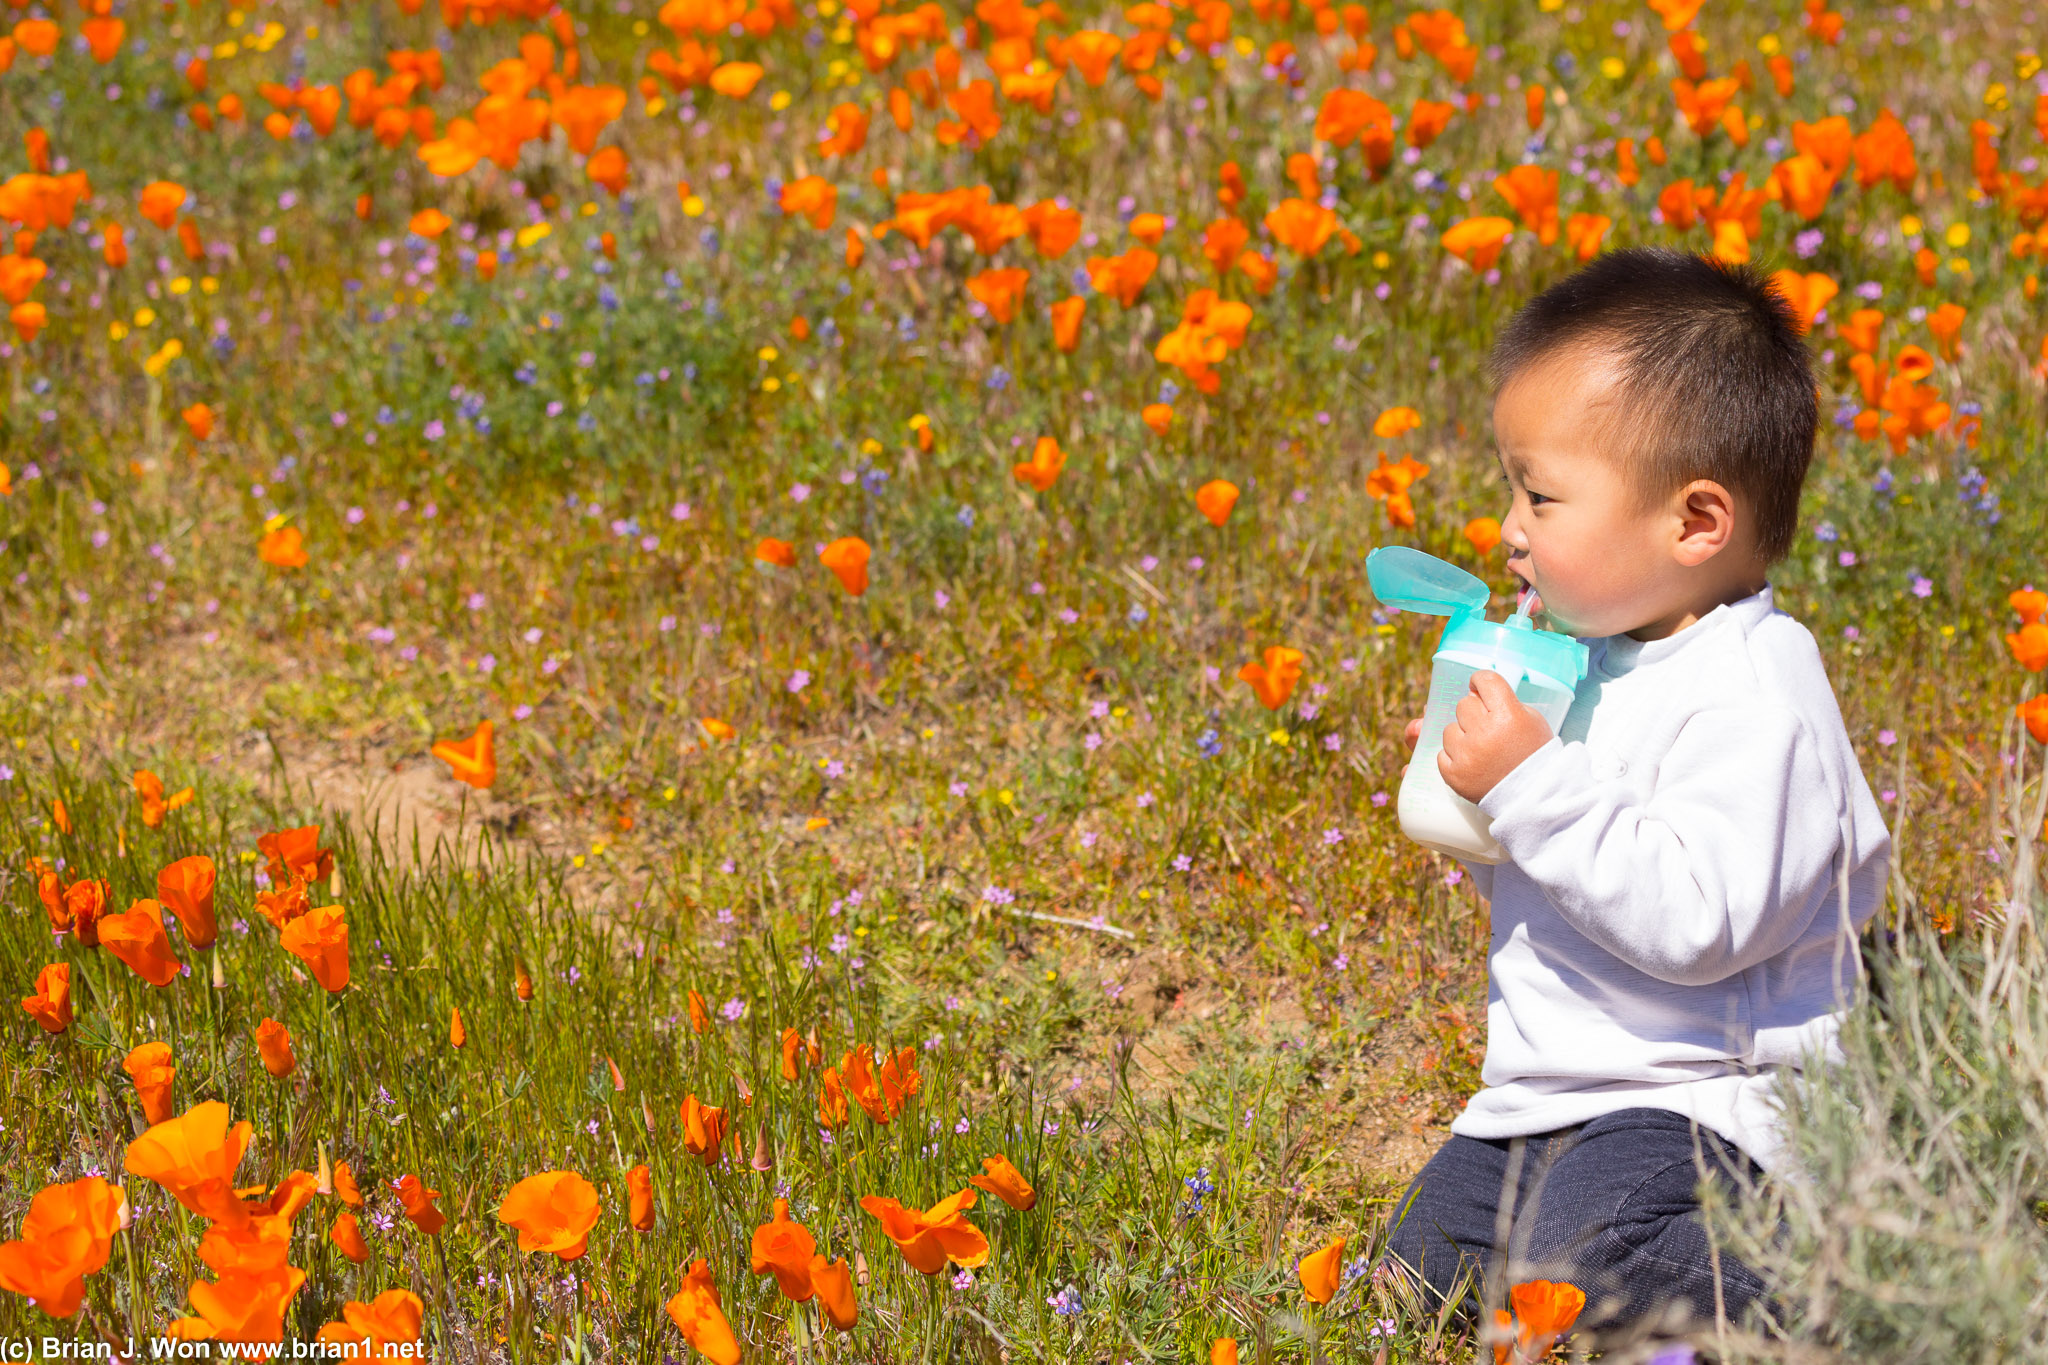 Drinking his milk among the fields of poppies.